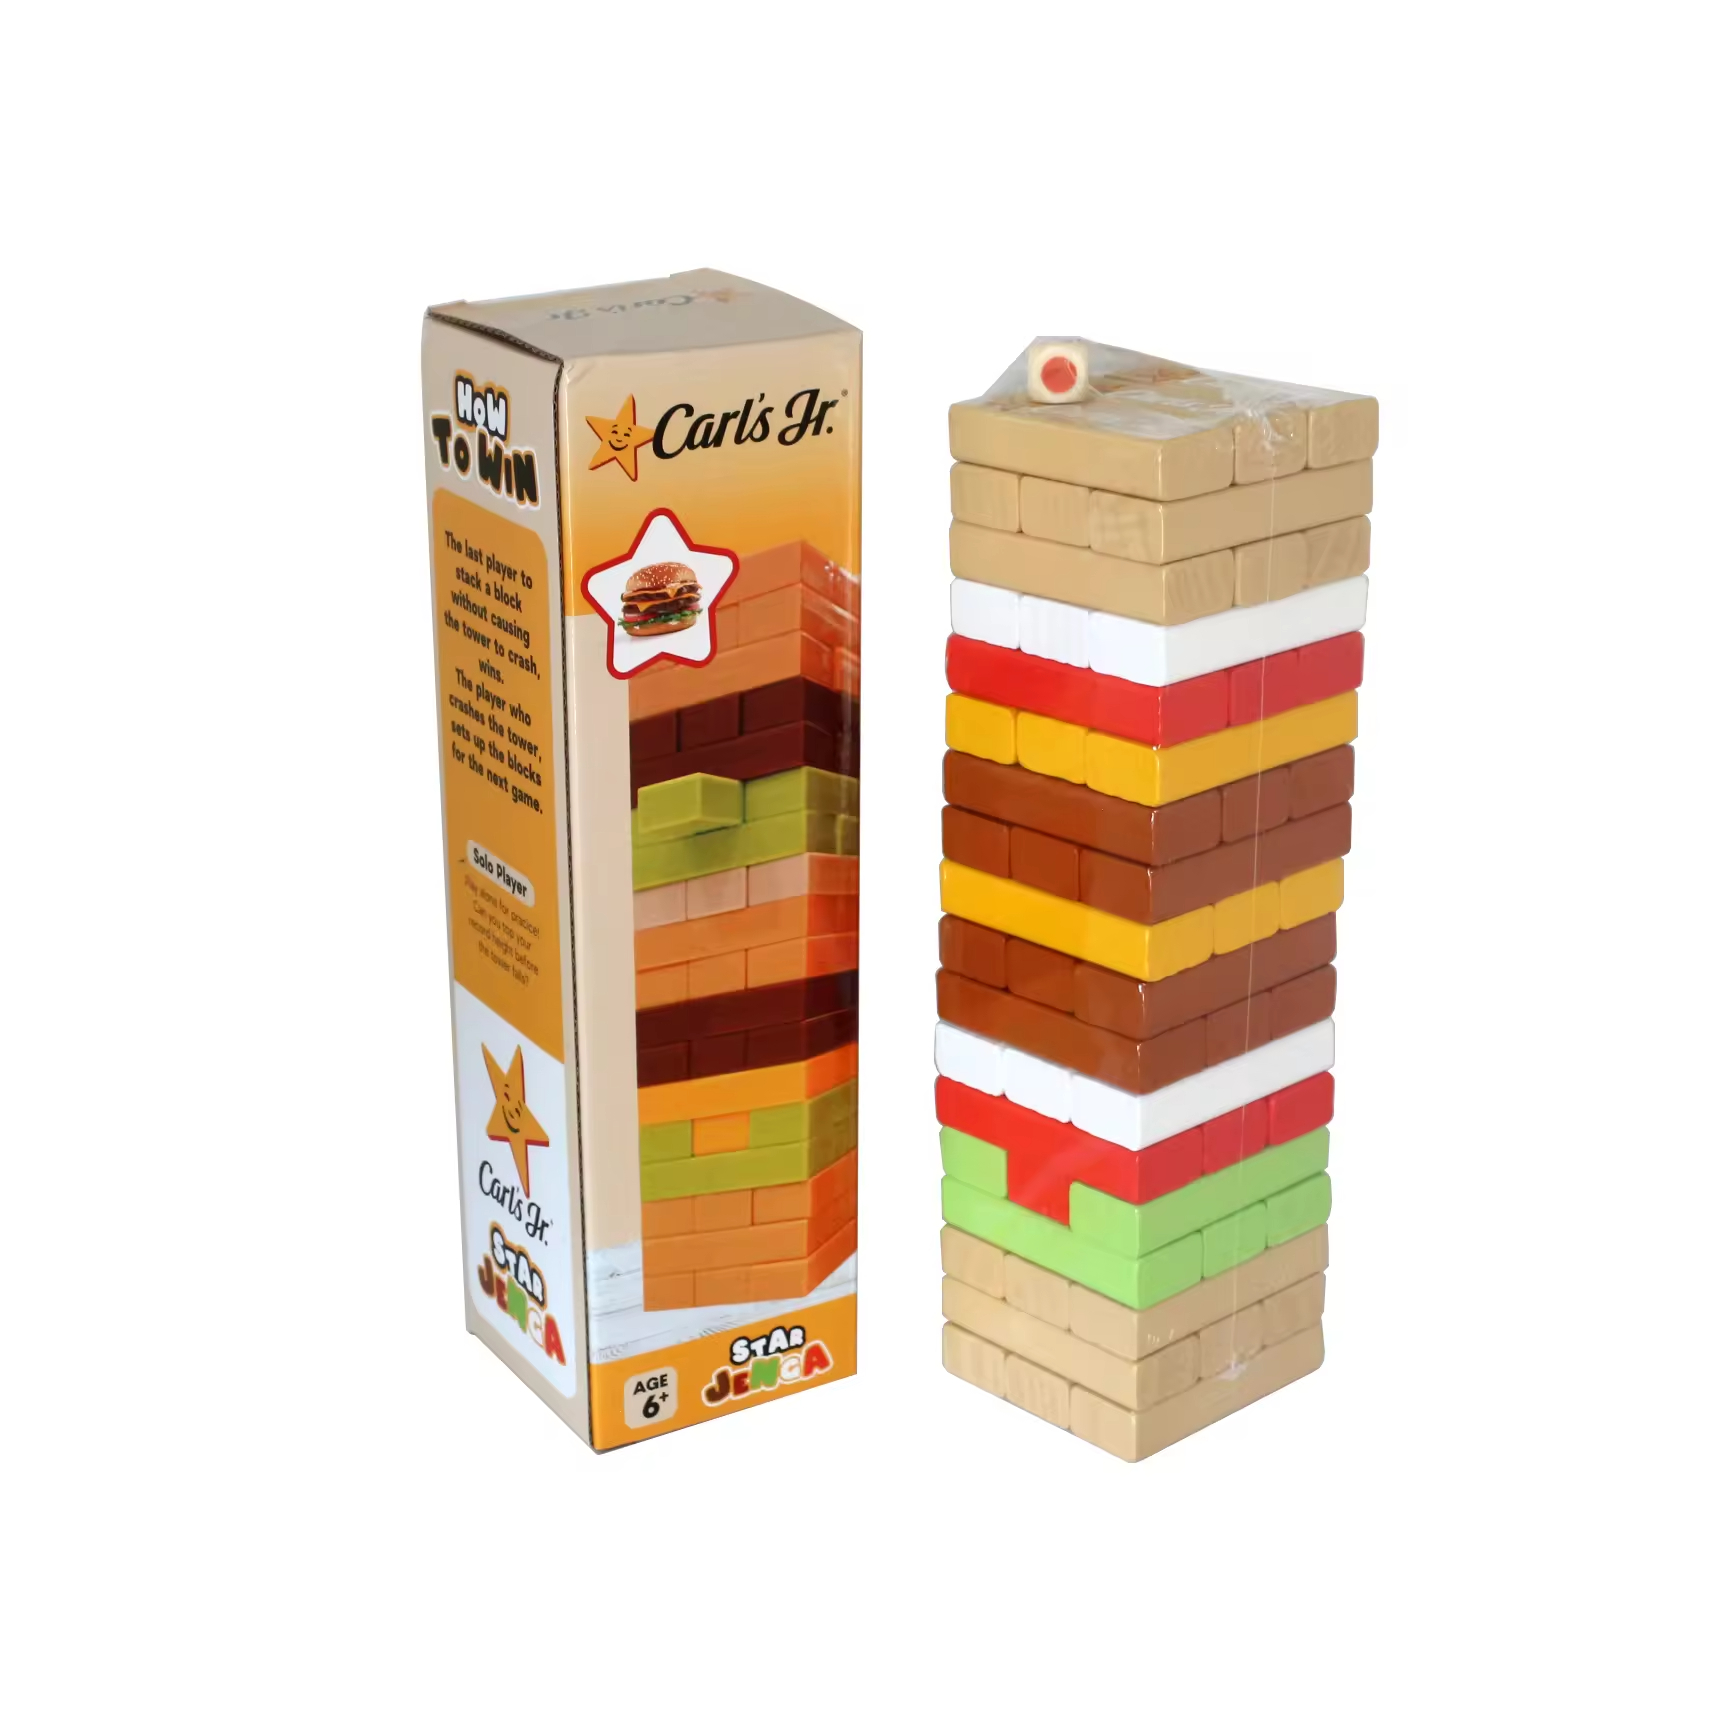 54 Pieces Colorful Wooden Tumble Tower Deluxe Stacking Game Colorful Wooden Tumbling Tower with Color Box Packing